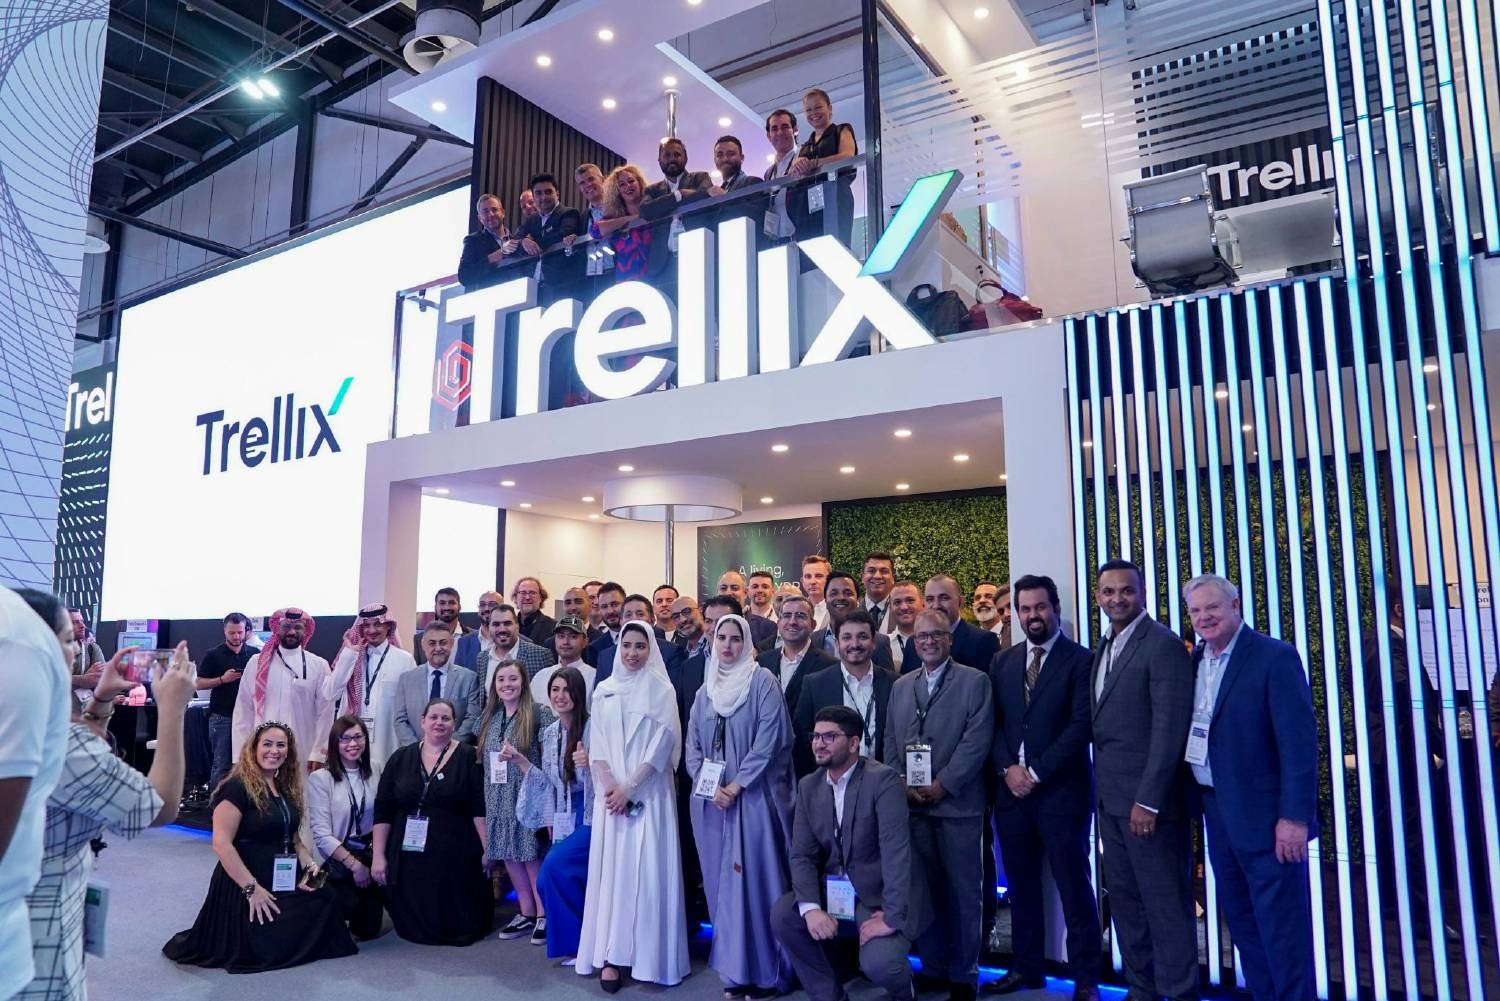 Trellix serves 40,000+ customers in over 70 countries!